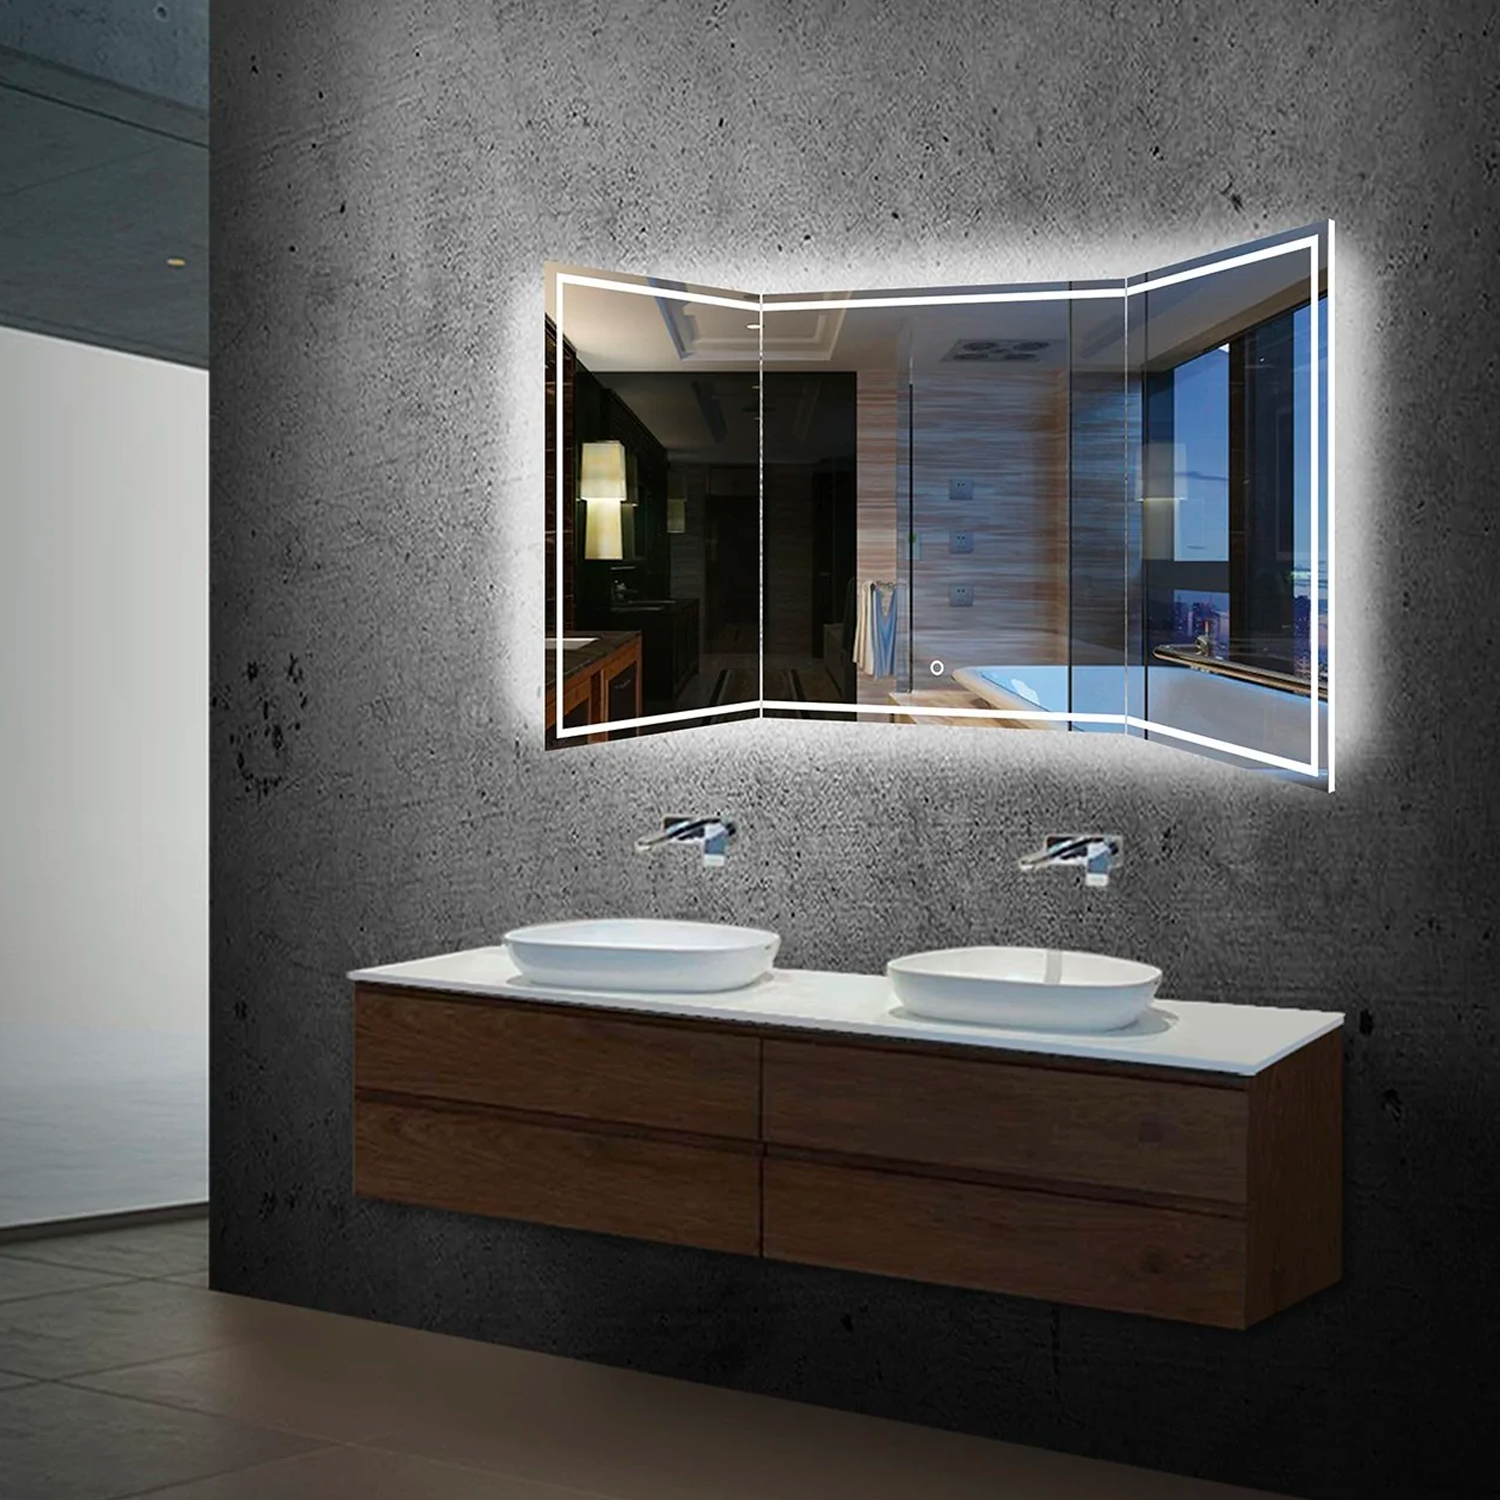 55.1 in. X 25.6 in. Backlit/Frontlit LED Lighted Bathroom Vanity Mirror with Pivoting Side Mirrors, Thin Plexiglass Edge, Anti Fog, Adjustable 3-Color Temperature & Remembrance, Makeup Mirror, Touch Button, Titan Style